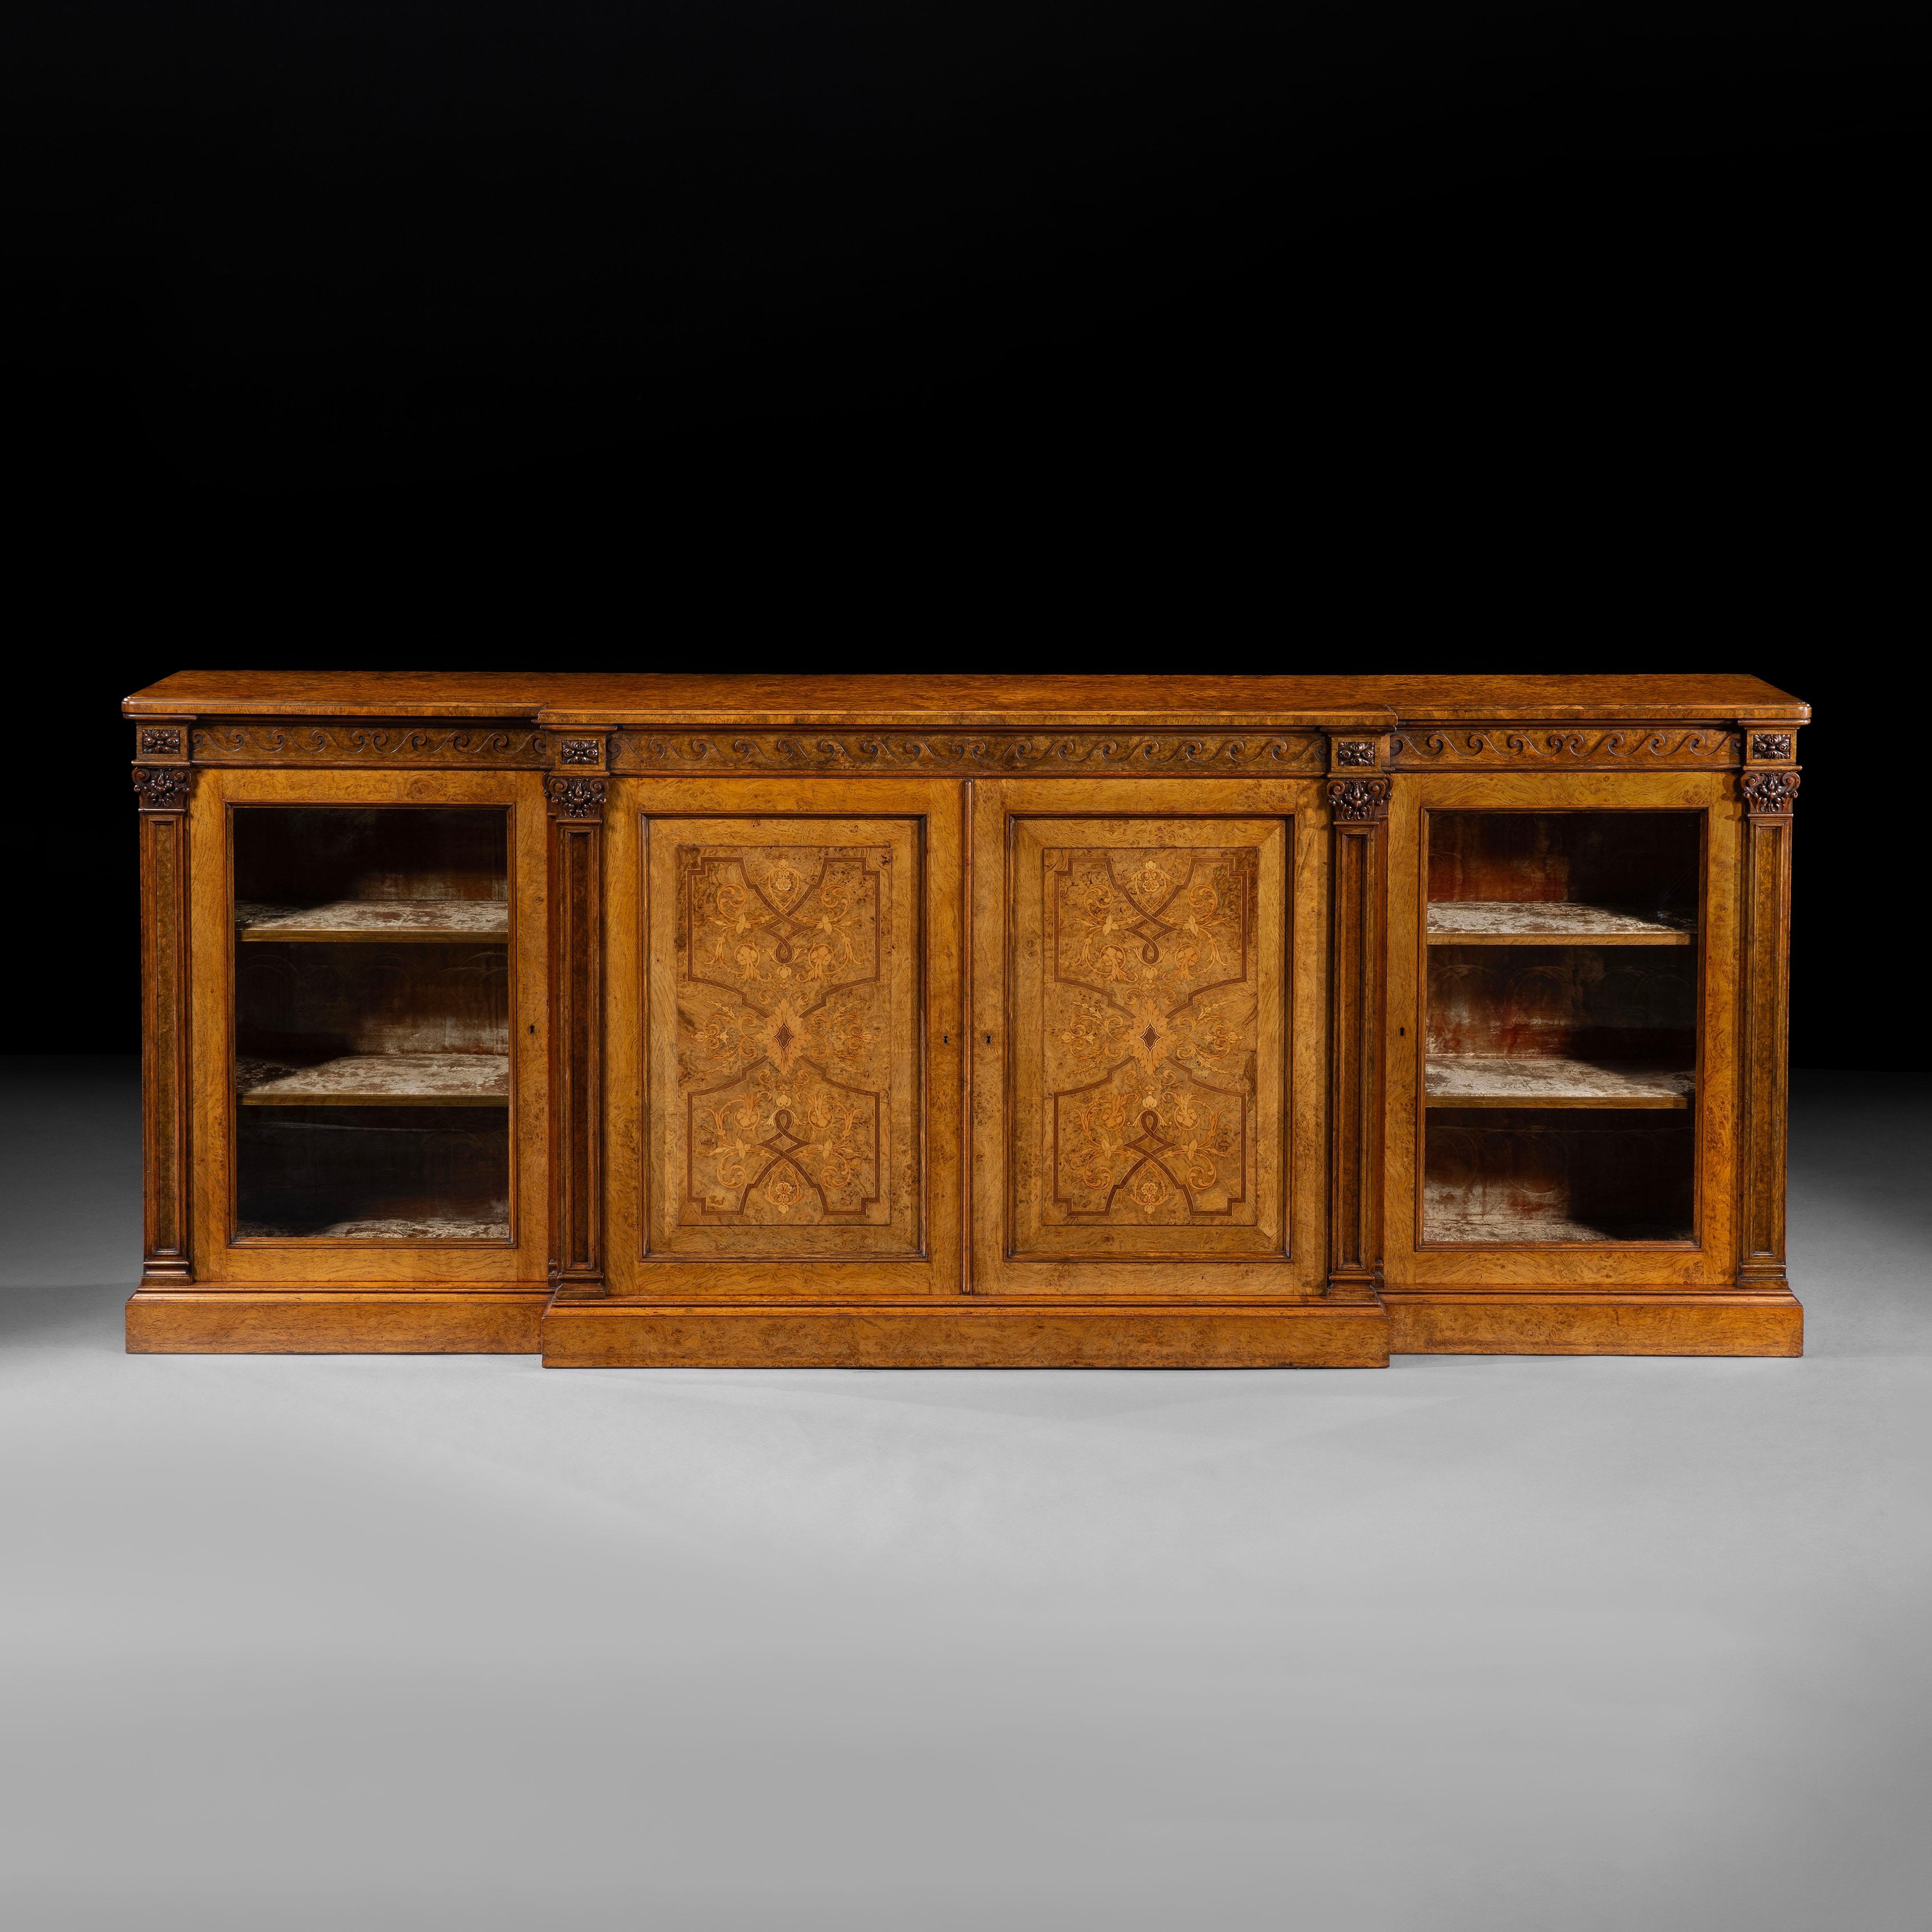 A Substantial Pollard Oak Library Bookcase
by Holland & Sons

Of low breakfront form, the whole bookcase constructed using a fine pollard oak and inlaid with a variety of specimen woods, having a continuous frieze with carved Vitruvian waves, below,